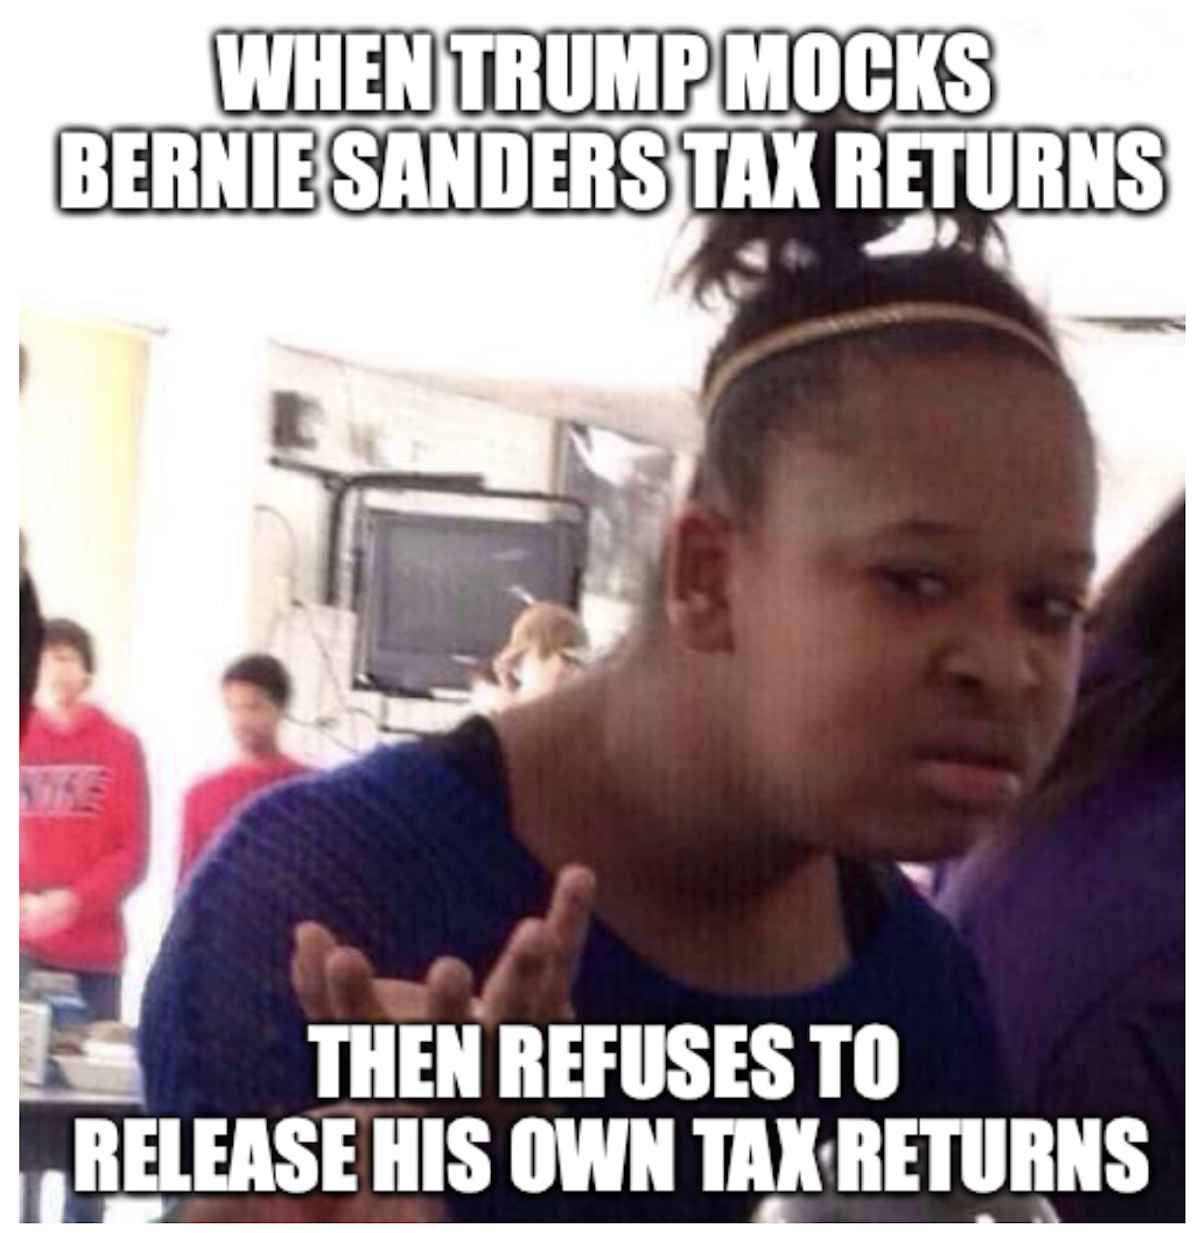 mexicans supporting trump meme - When Trump Mocks Bernie Sanders Tax Returns Then Refuses To Release His Own Tax Returns